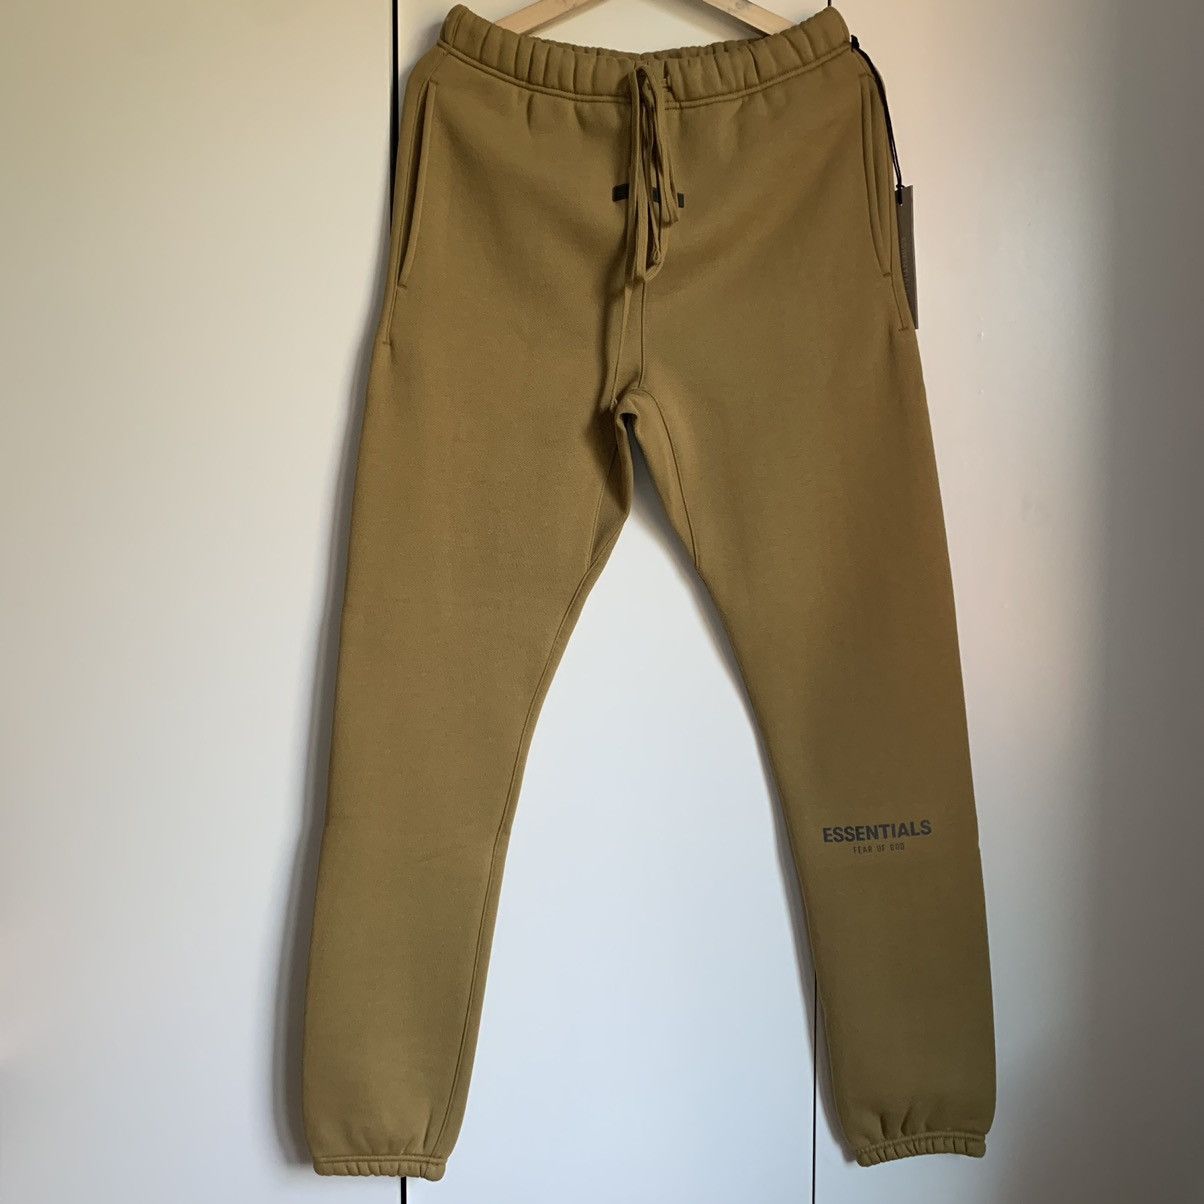 free shipping and free returns Fear of God Essentials Sweatpants ...